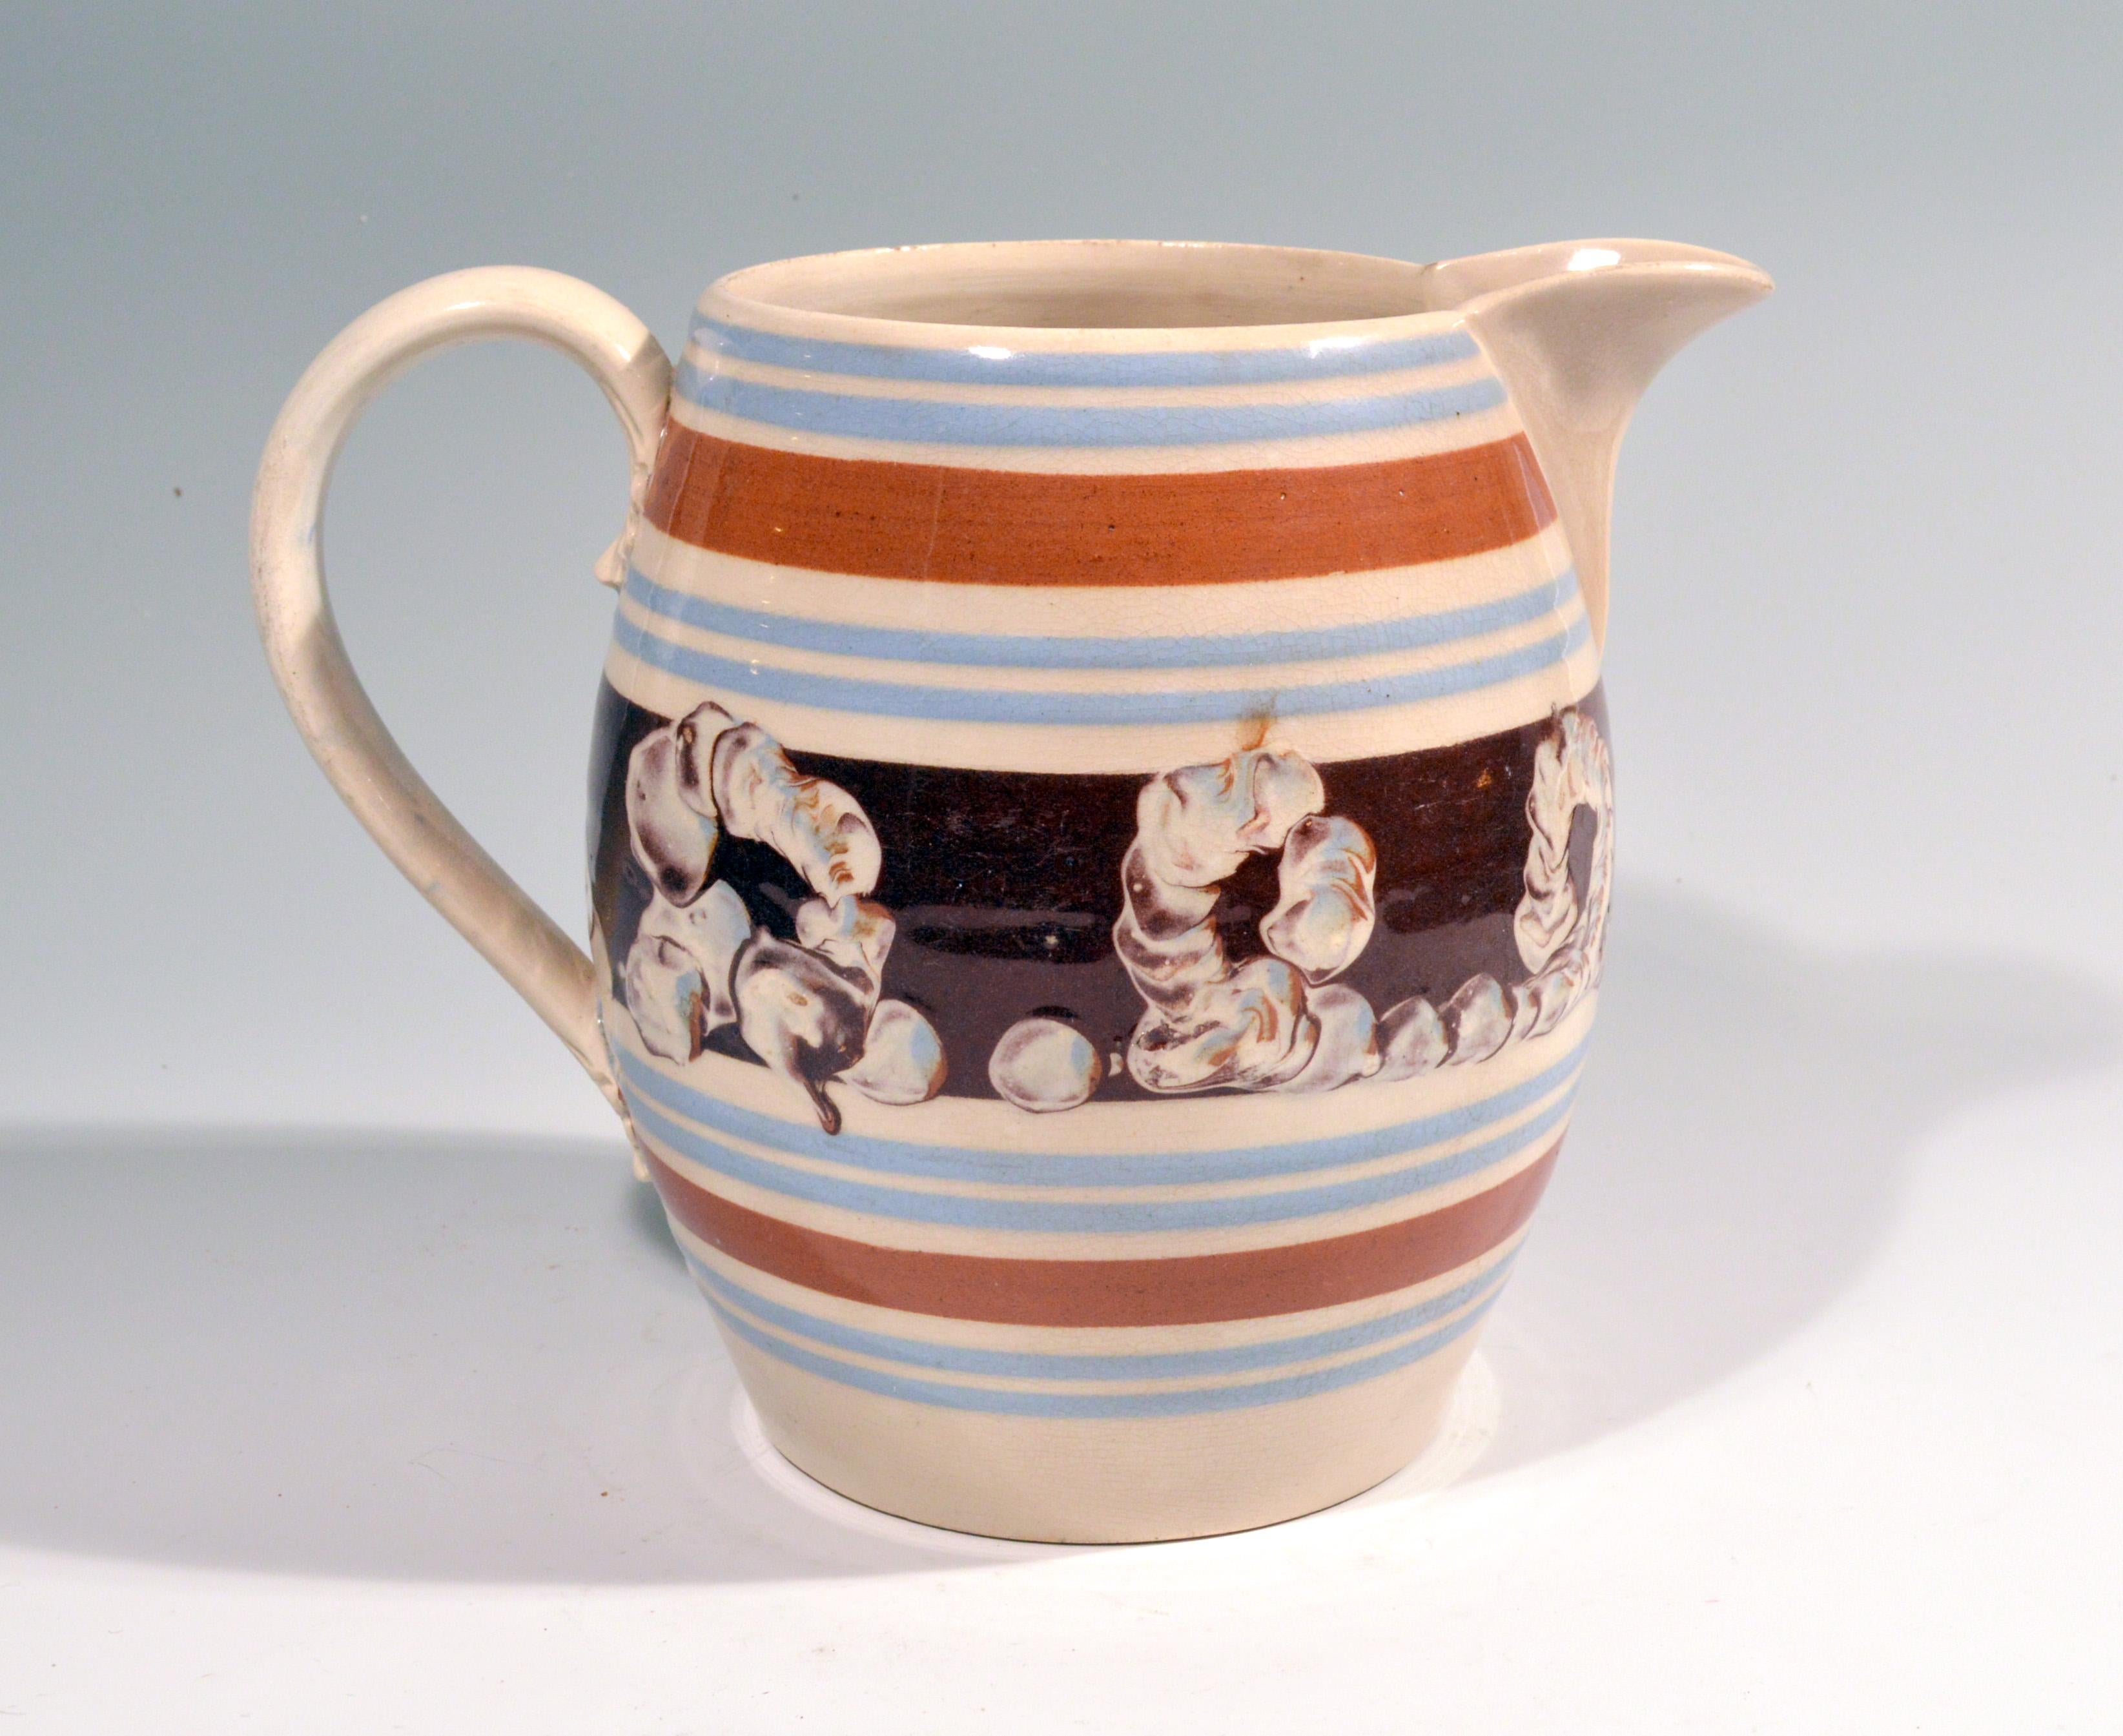 English Pottery Mocha large Barrel-form Jug with Earthworm design, 
circa 1820

A large Mocha pottery jug with a central slip band of an ochre-colored ground decorated with an earthworm design between two blue thin bands and two brown lines above